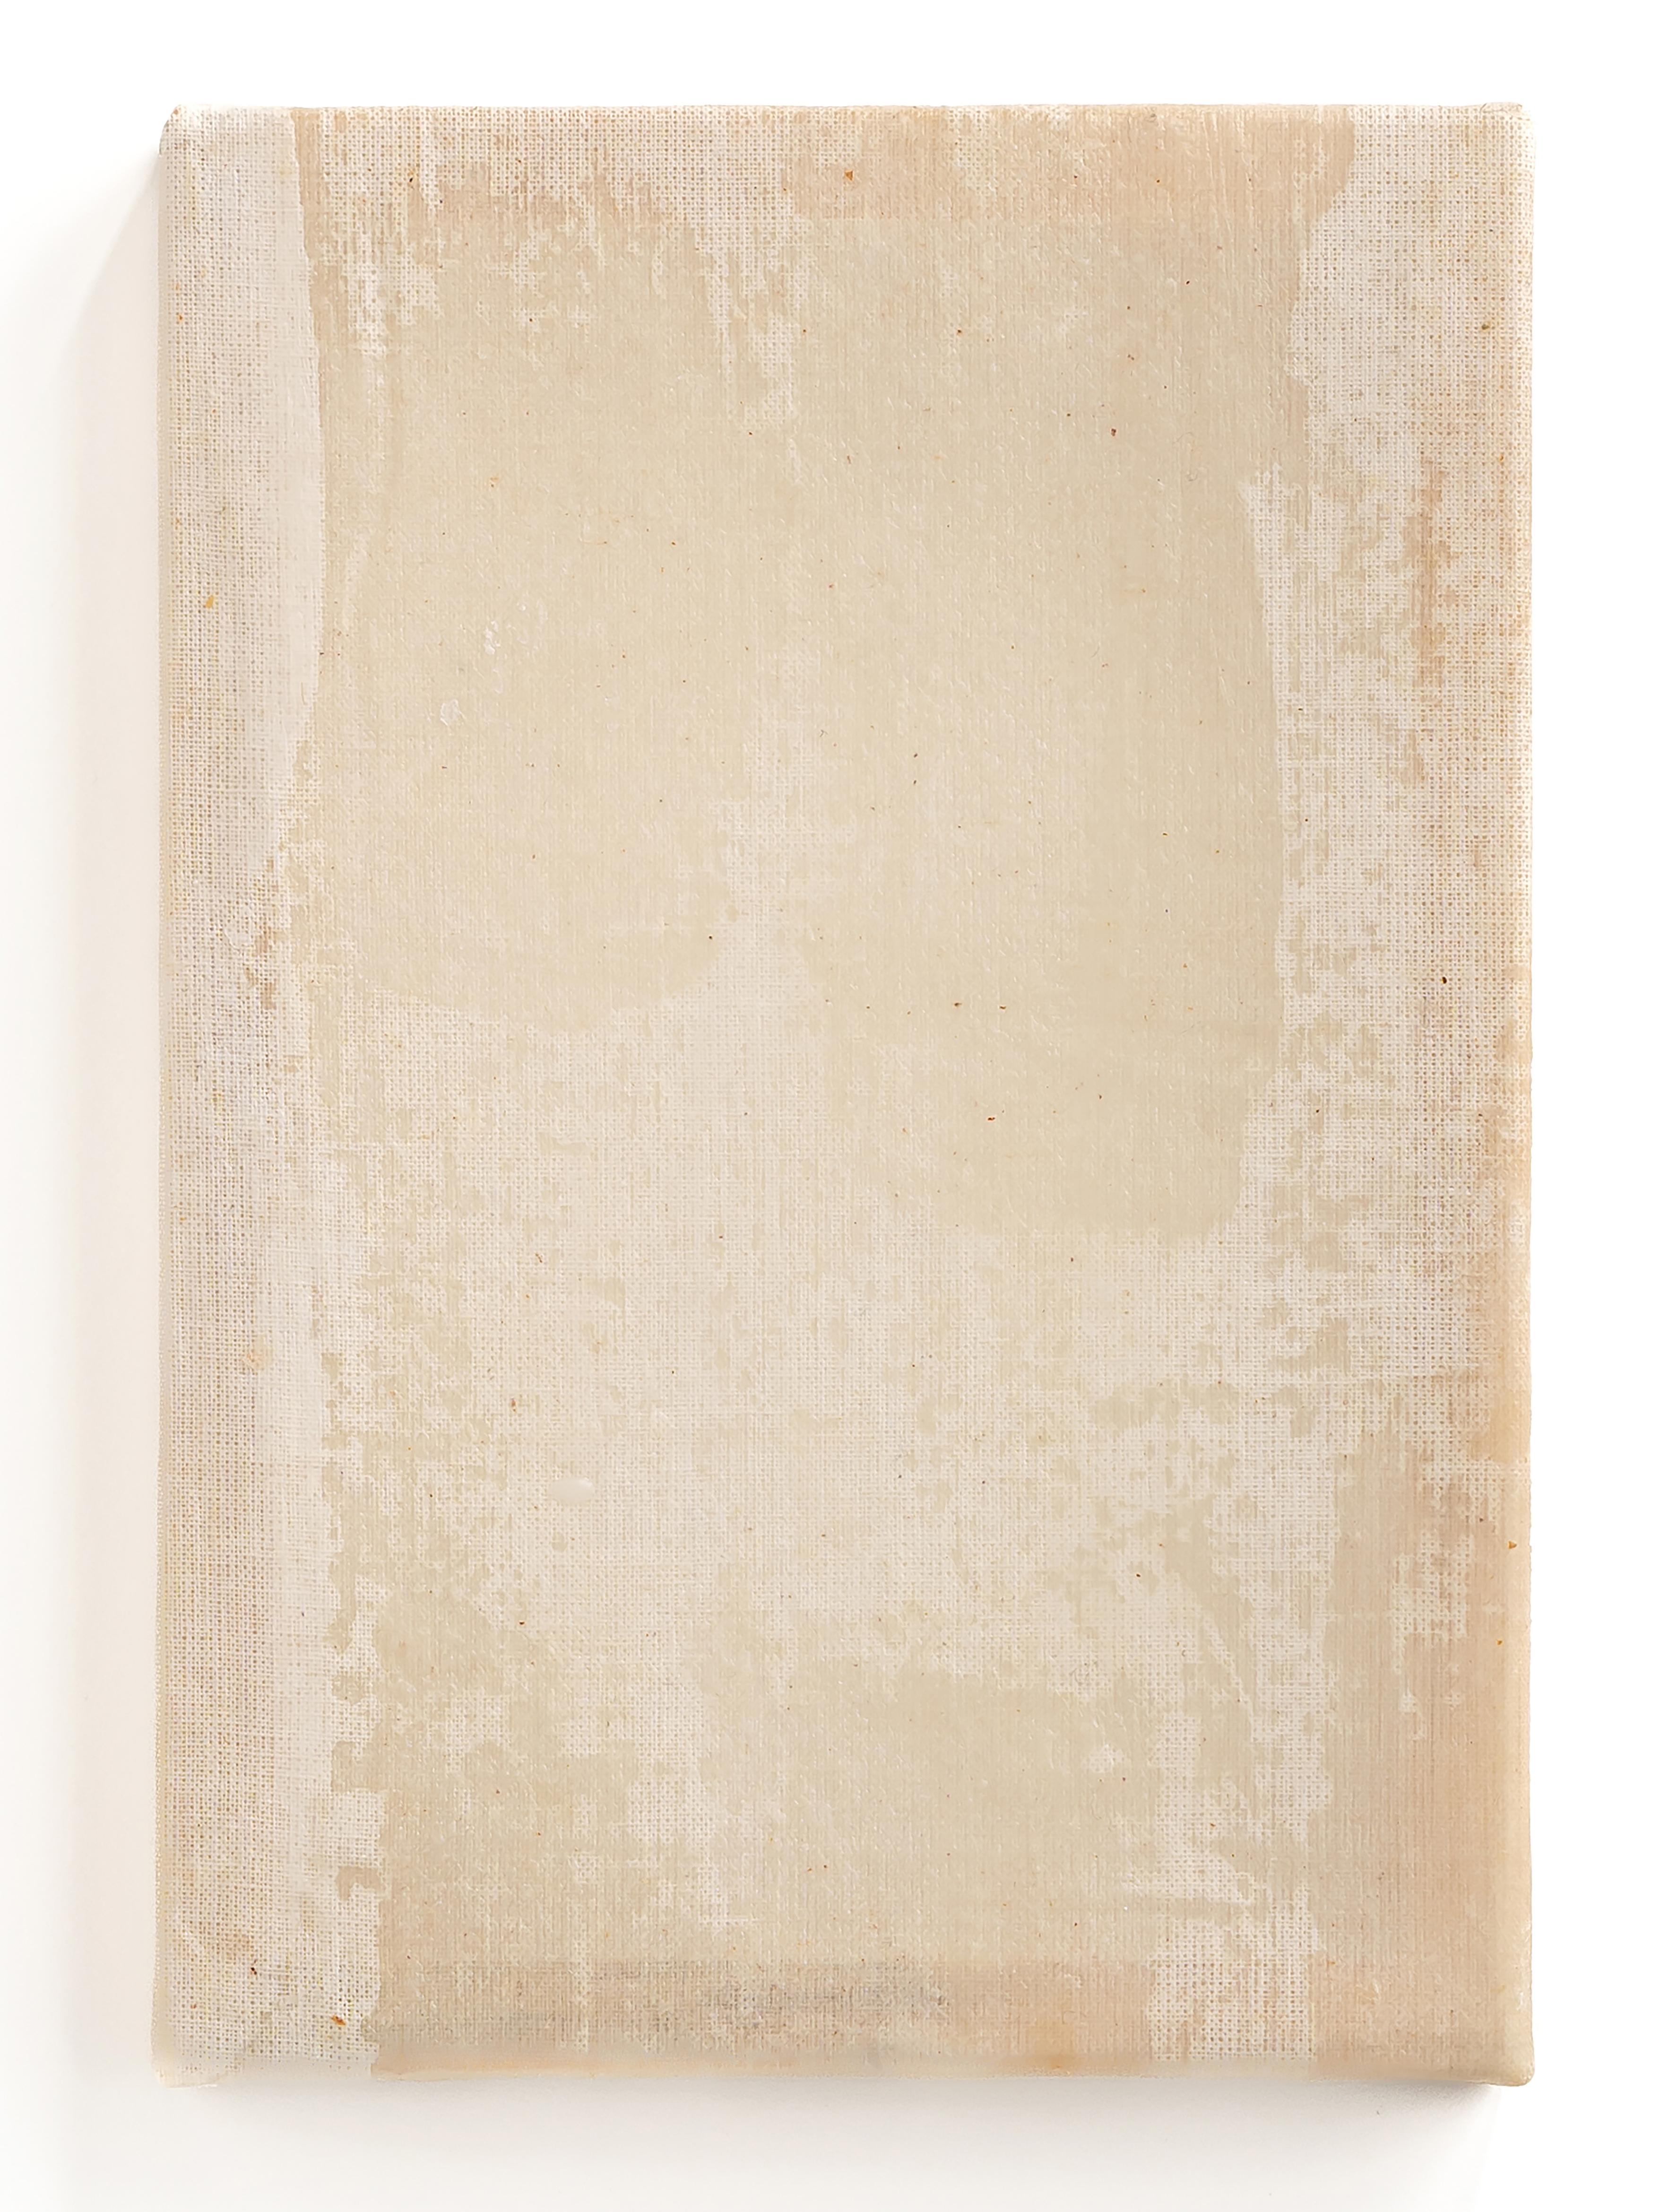 UNTITLED 0.12 – wax on linen, natural materials, ecologies, minimal/abstract scr